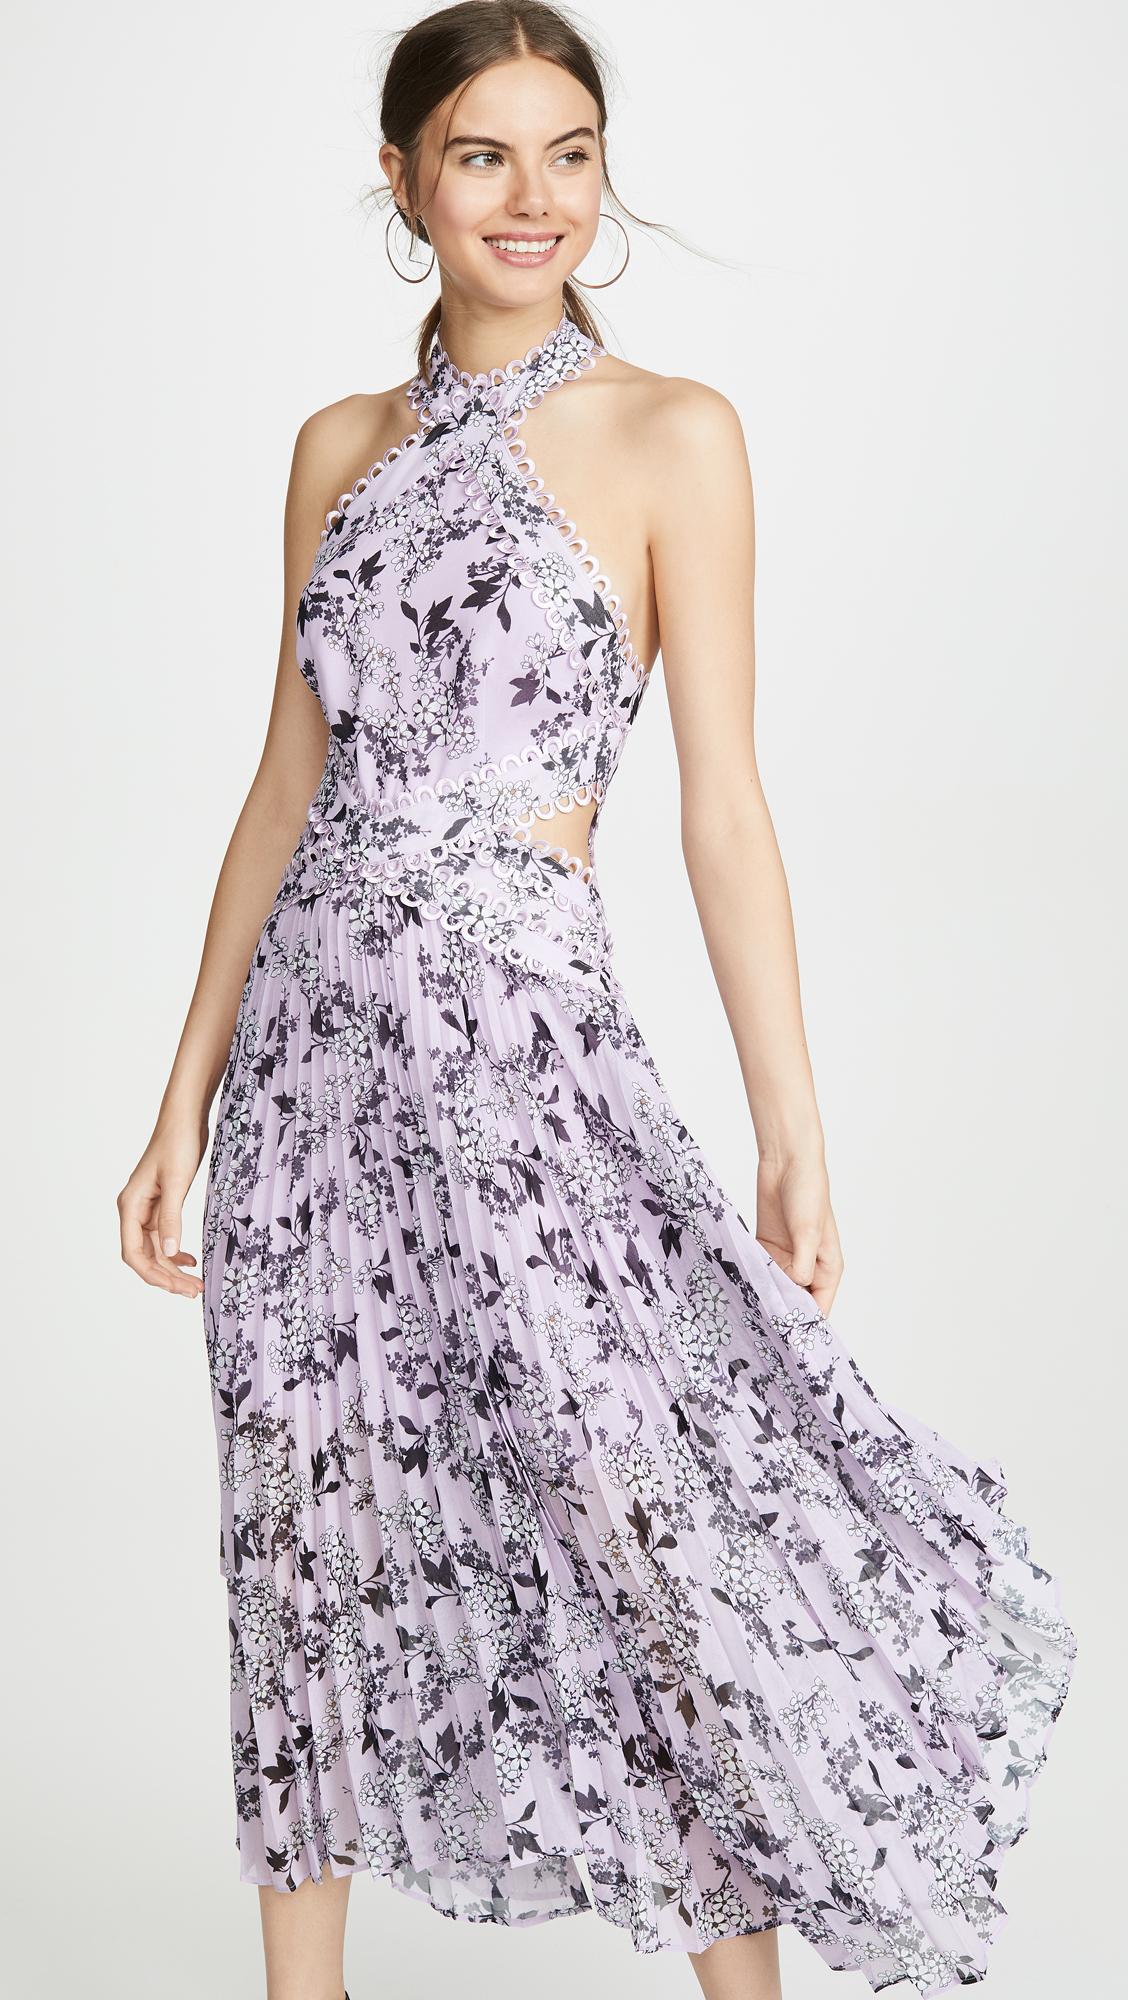 Keepsake Synthetic Luscious Dress in Lilac Floral (Purple) - Lyst